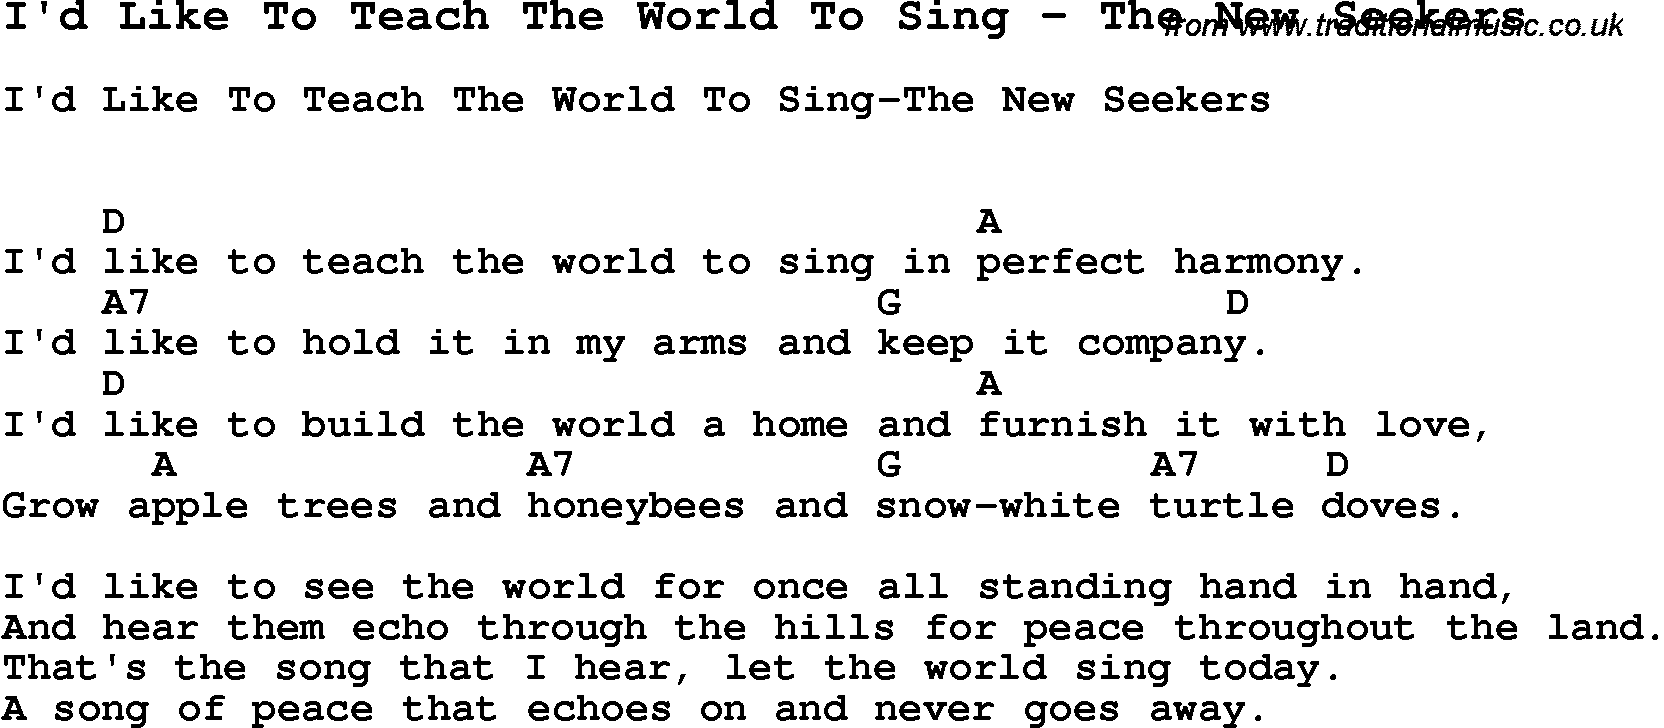 Song I'd Like To Teach The World To Sing by The New Seekers, with lyrics for vocal performance and accompaniment chords for Ukulele, Guitar Banjo etc.